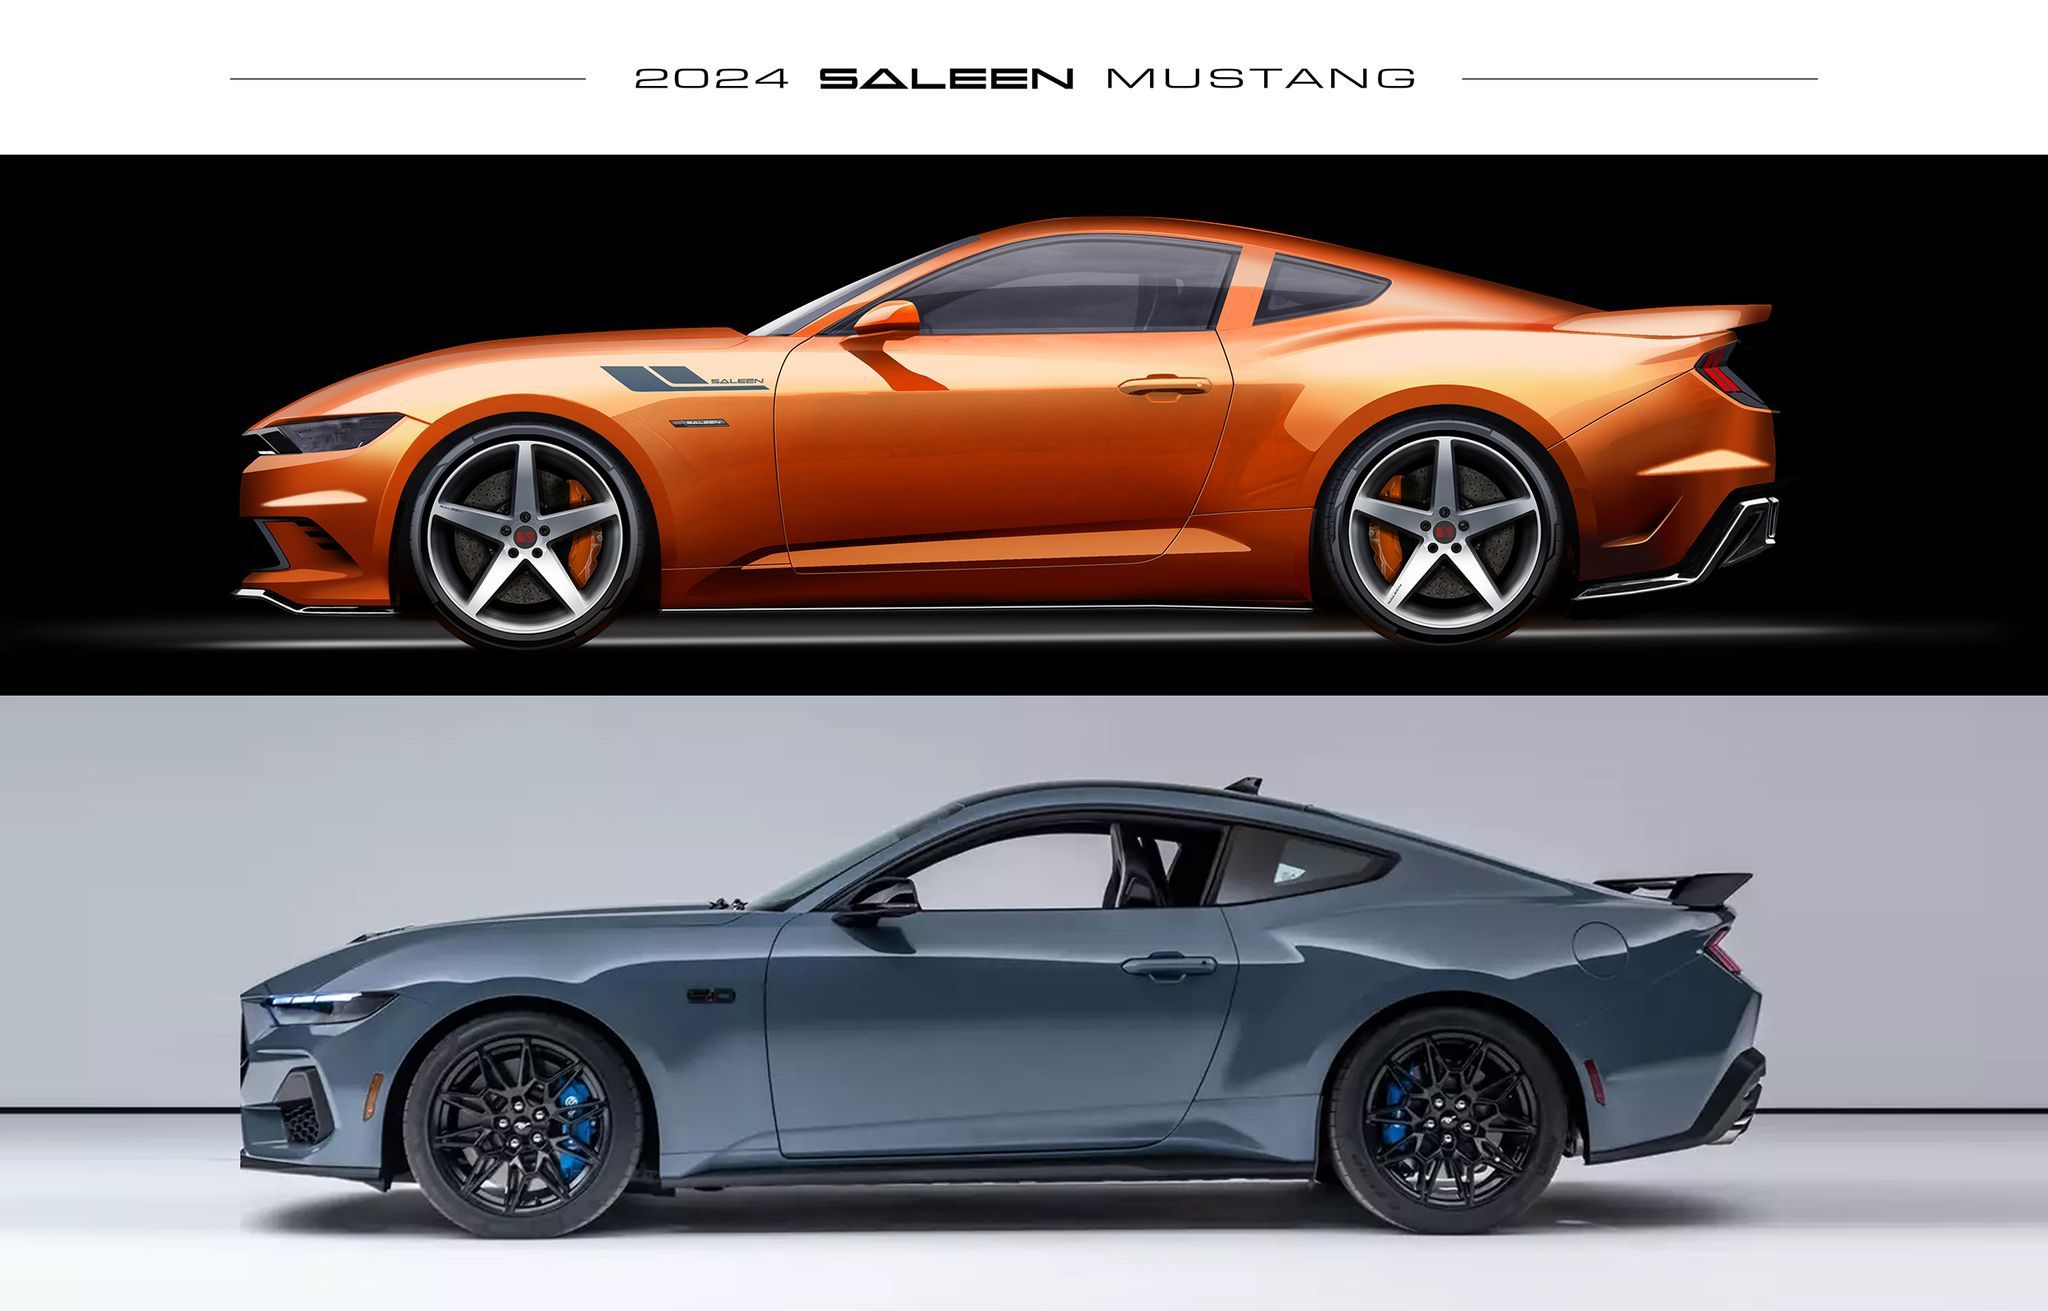 2024 Ford Mustang Saleen Side Profile With Original 2024 Mustang